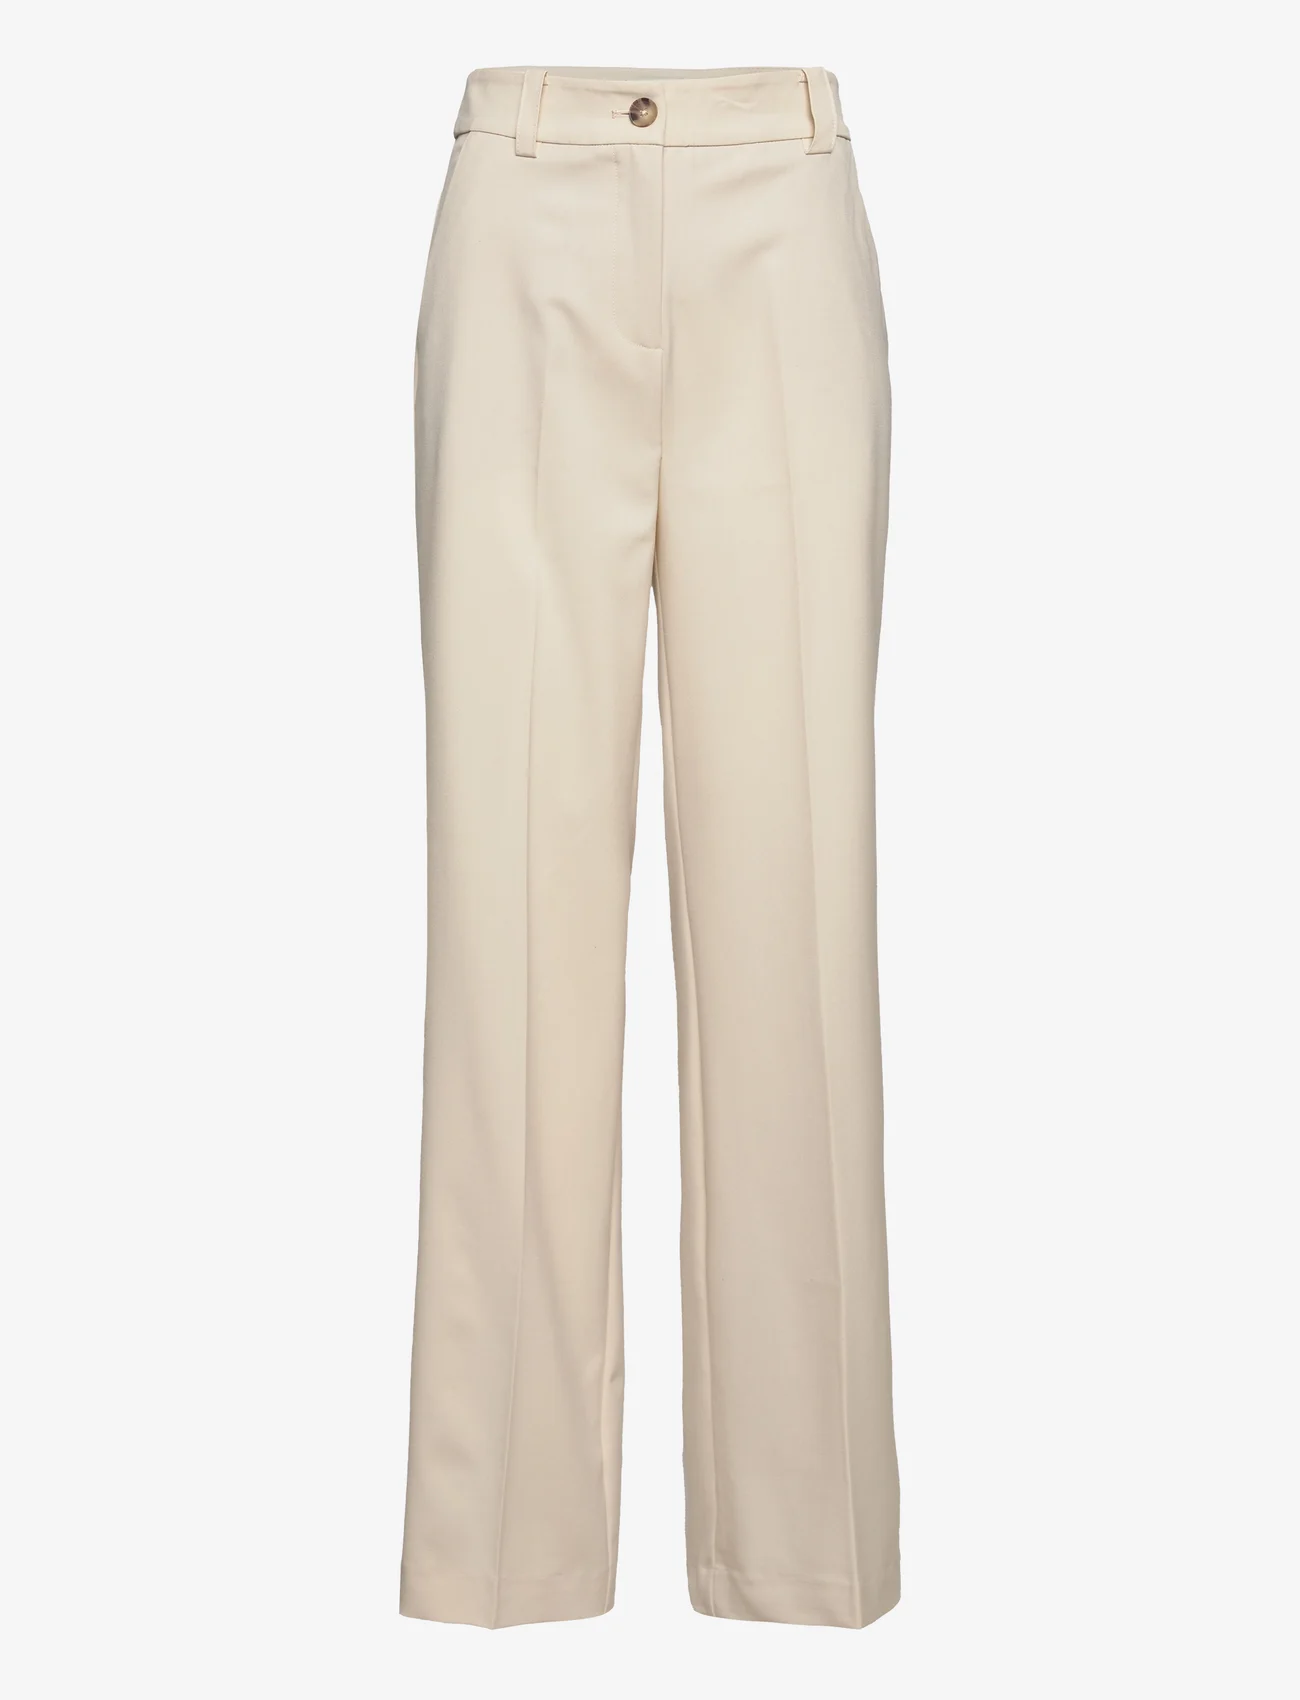 Modström - AnkerMD pants - tailored trousers - summer sand - 0